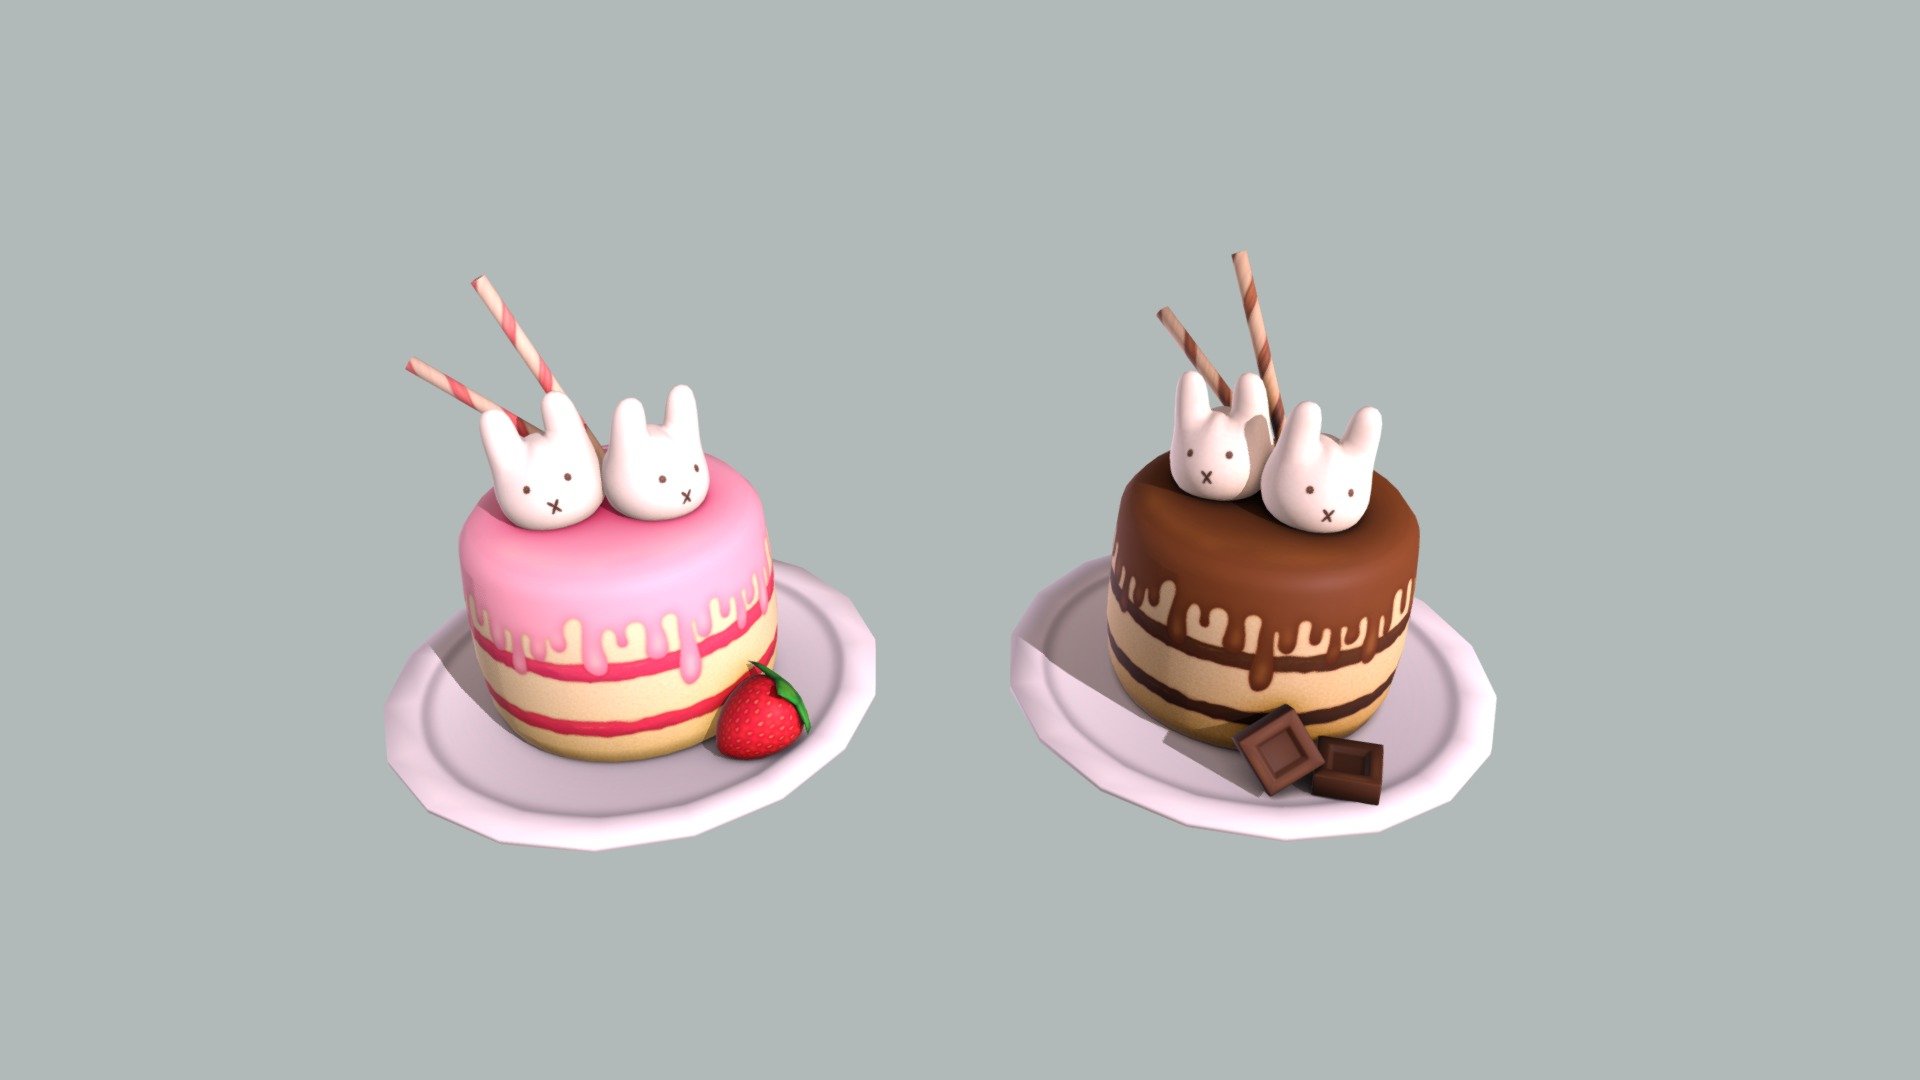 some bunny cakes I made for my second life store, find em here!
https://marketplace.secondlife.com/p/Liminality-Bunny-Cakes/15638934 - Bunny Cakes - 3D model by Rika Creature (@rikacreature) 3d model